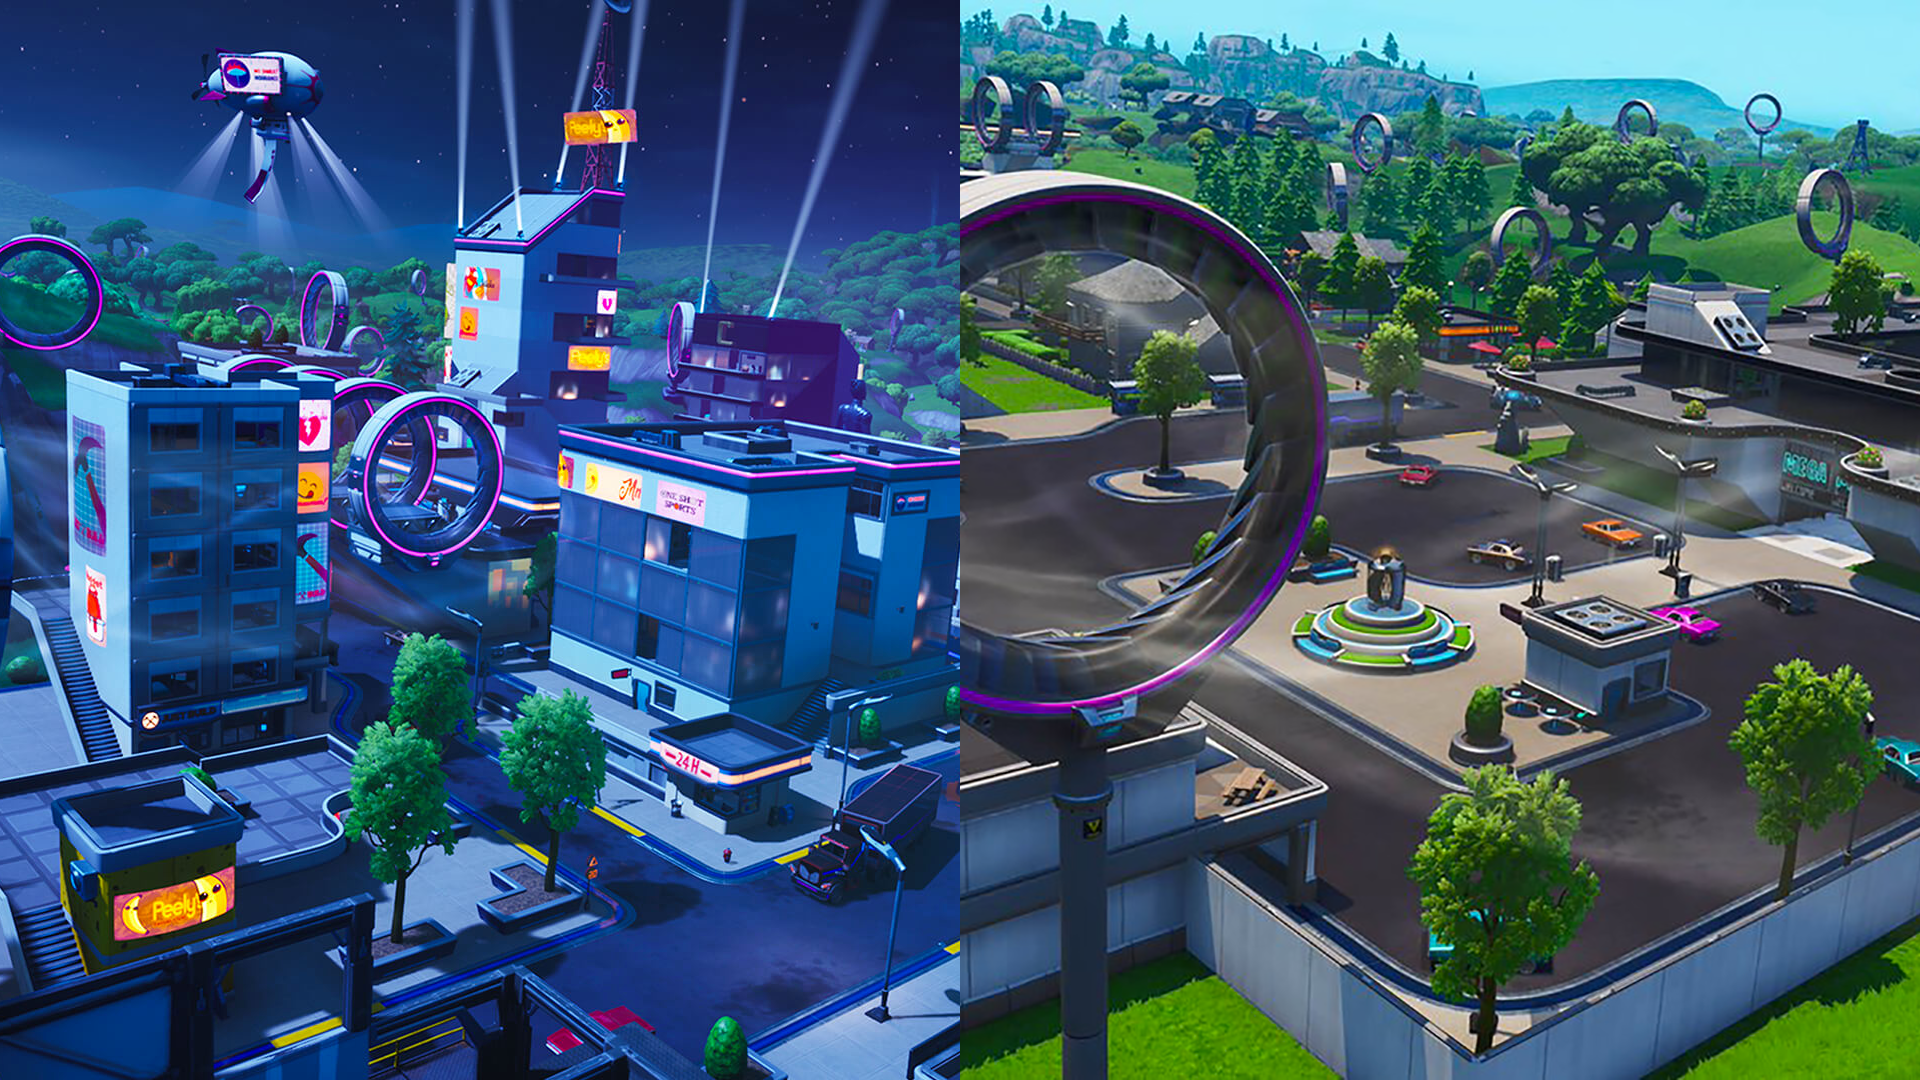 New Retail Row Fortnite Here S What Tilted Towers And Retail Row Look Like In Season 9 Of Fortnite Sporting News